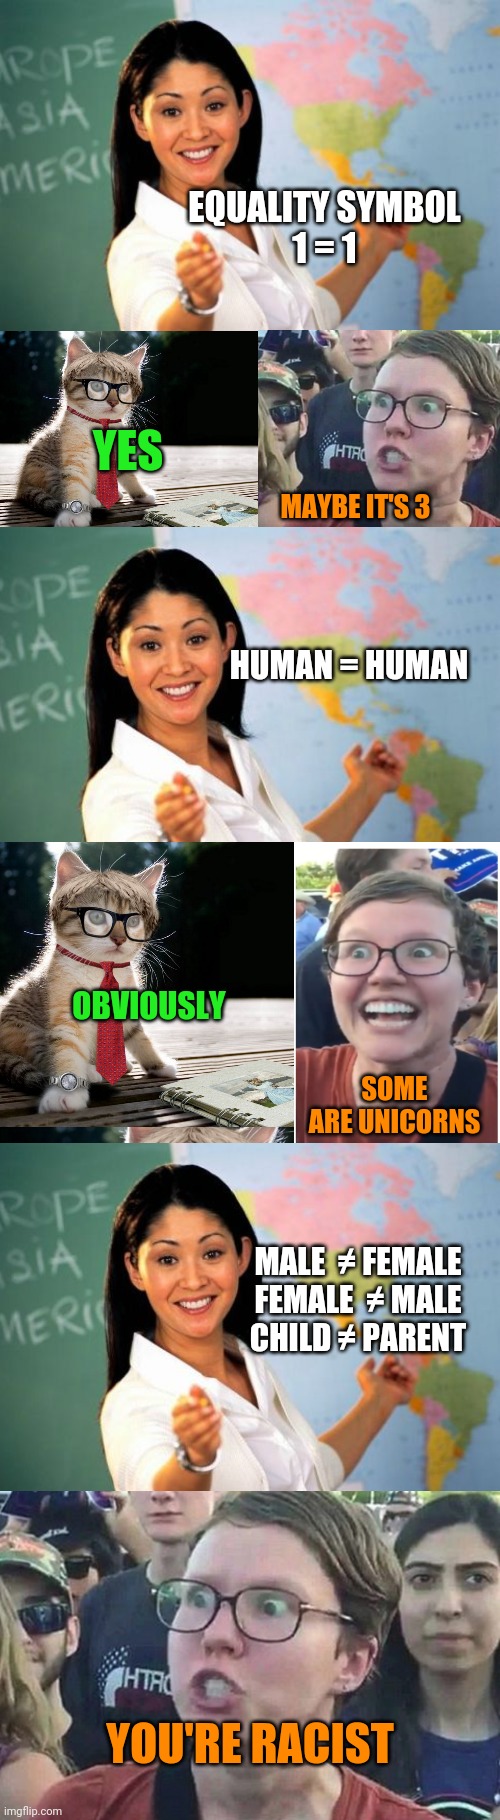 Back to basics | EQUALITY SYMBOL

1 = 1; YES; MAYBE IT'S 3; HUMAN = HUMAN; OBVIOUSLY; SOME ARE UNICORNS; MALE  ≠ FEMALE
FEMALE  ≠ MALE
CHILD ≠ PARENT; YOU'RE RACIST | image tagged in cat teacher meme,trigerred class meme,equality symbol meme,1 equals 1 meme,logic meme | made w/ Imgflip meme maker